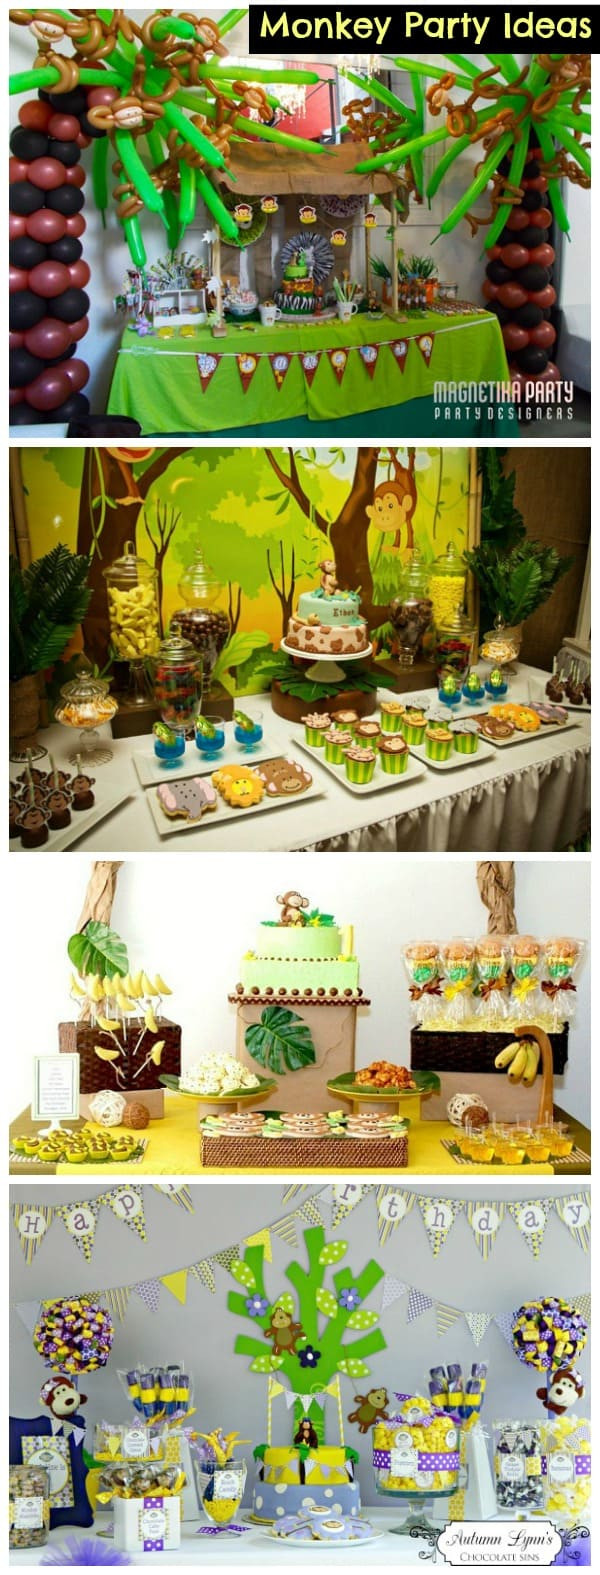 Monkey Birthday Party Food Ideas
 Monkey Party Ideas Collection Moms & Munchkins